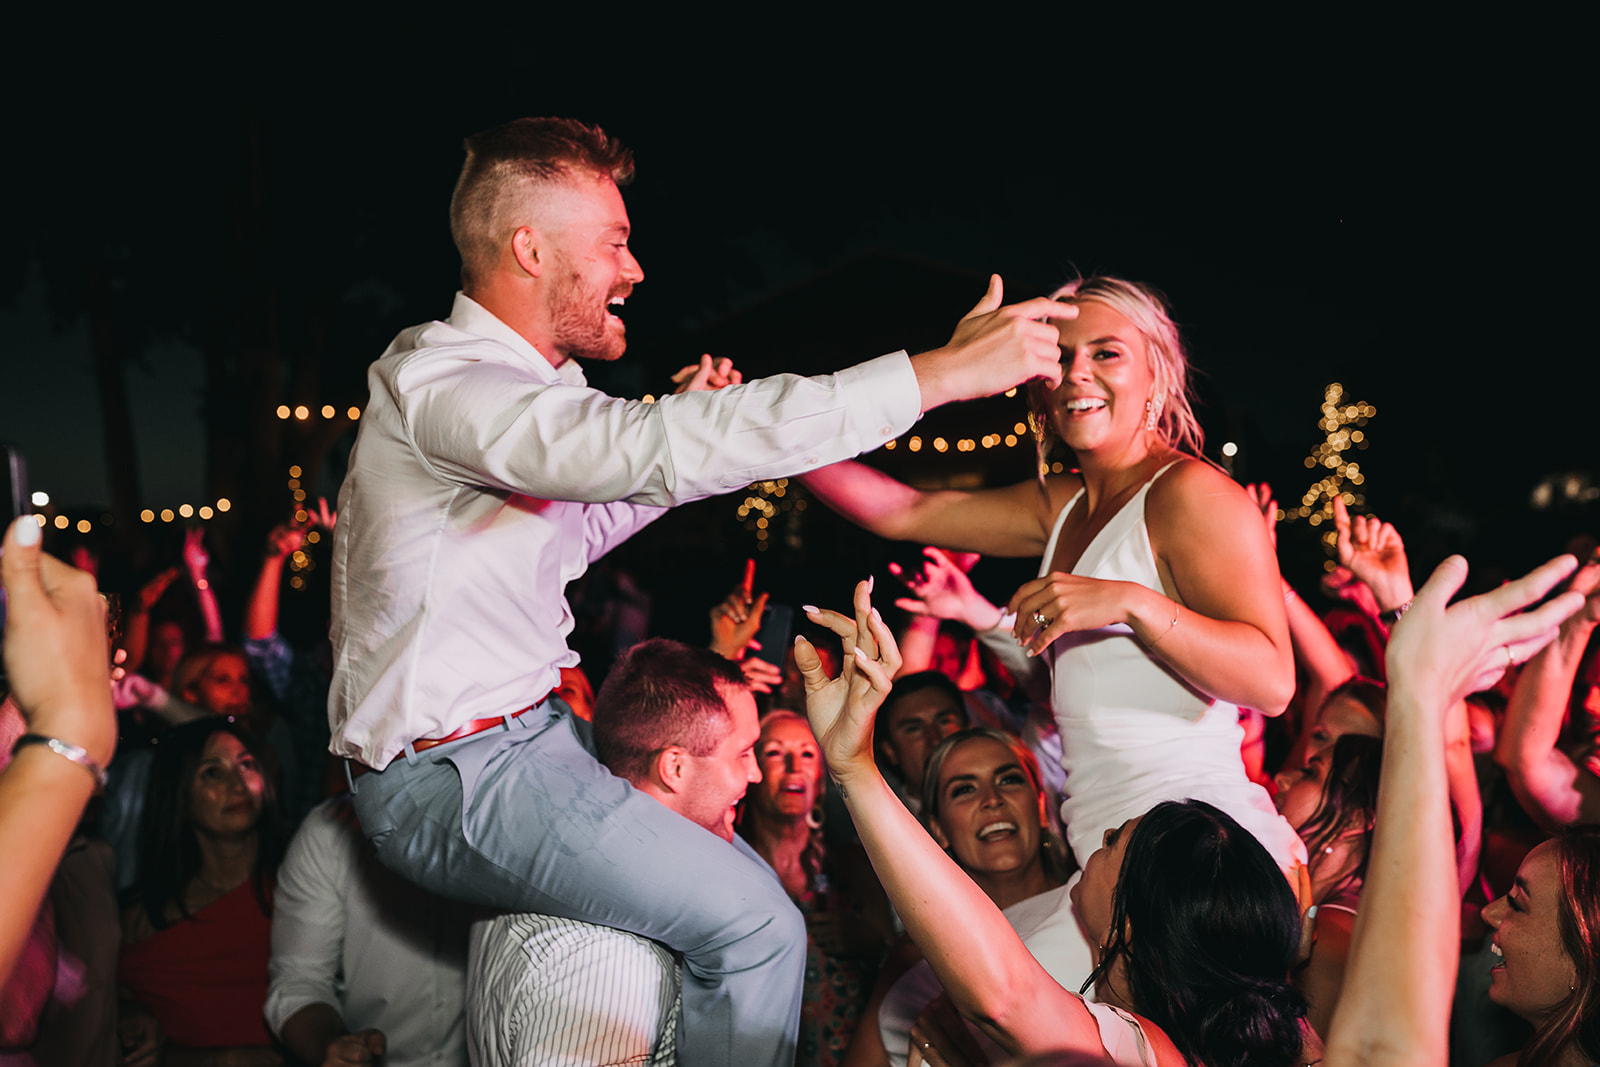 Bride and groom getting lifted up on guest shoulders and have a blast at wedding reception